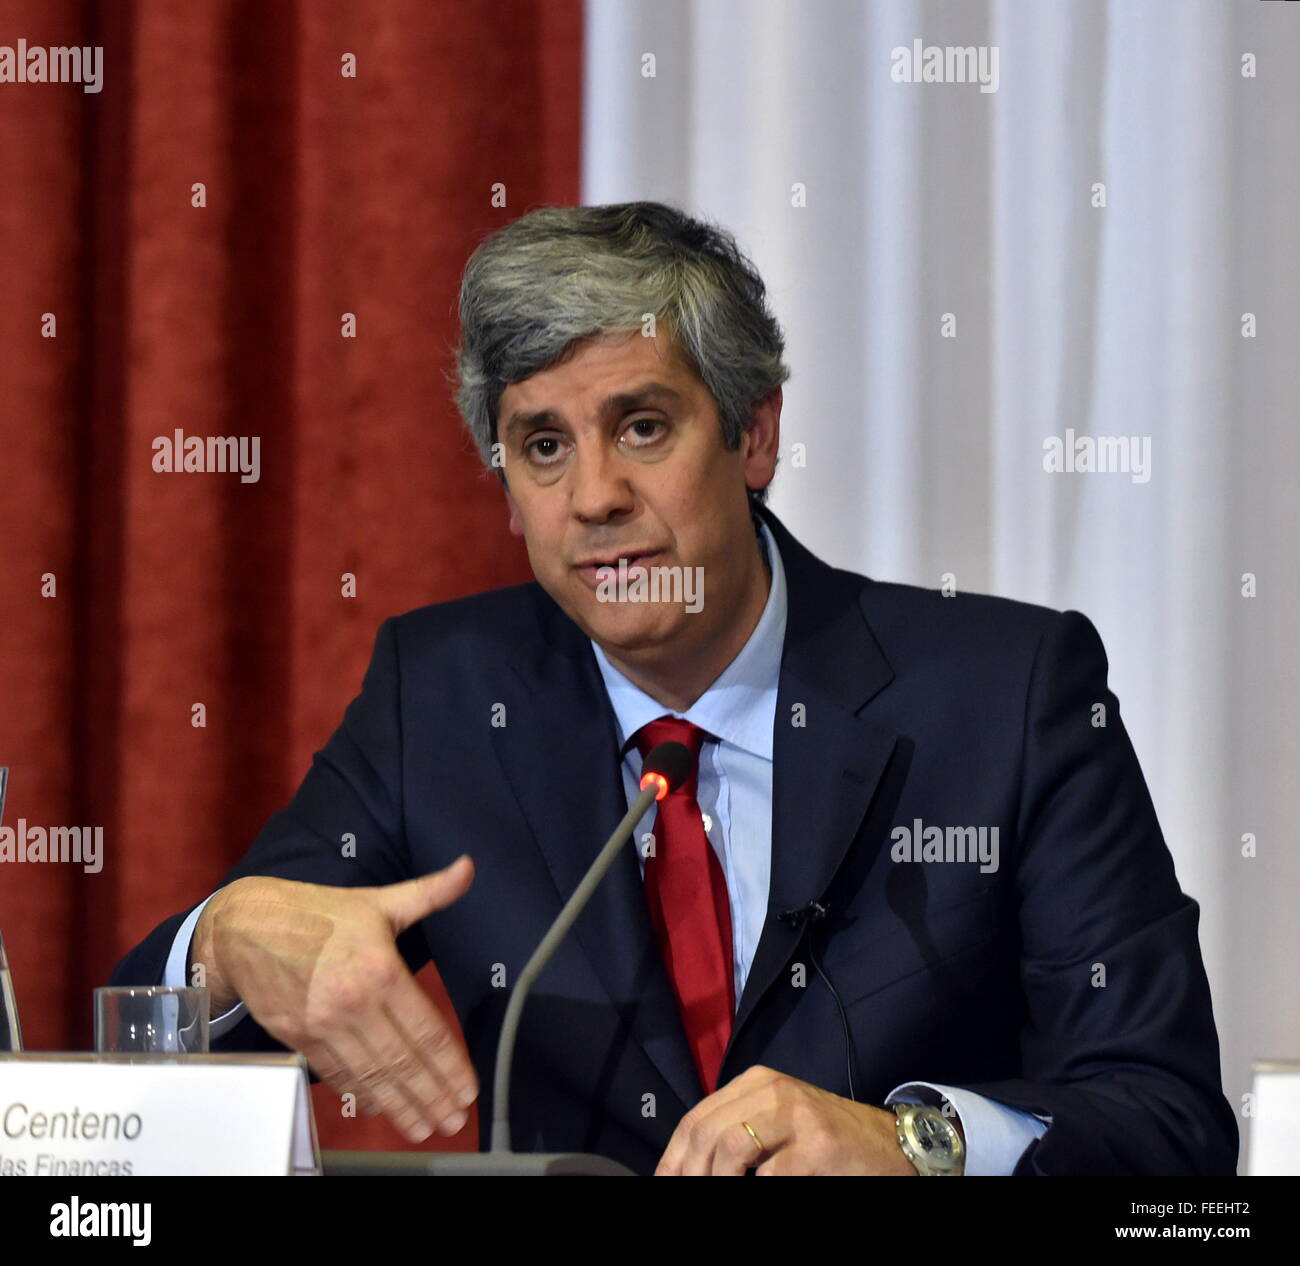 Lisbon. 5th Feb, 2016. Portuguese Finance Minister Mario Centeno speaks during a press conference to unveil the draft state budget in Lisbon on Feb. 5, 2016. Portugual's budget deficit target for 2016 is 2.2 percent of GDP. © Zhang Liyun/Xinhua/Alamy Live News Stock Photo